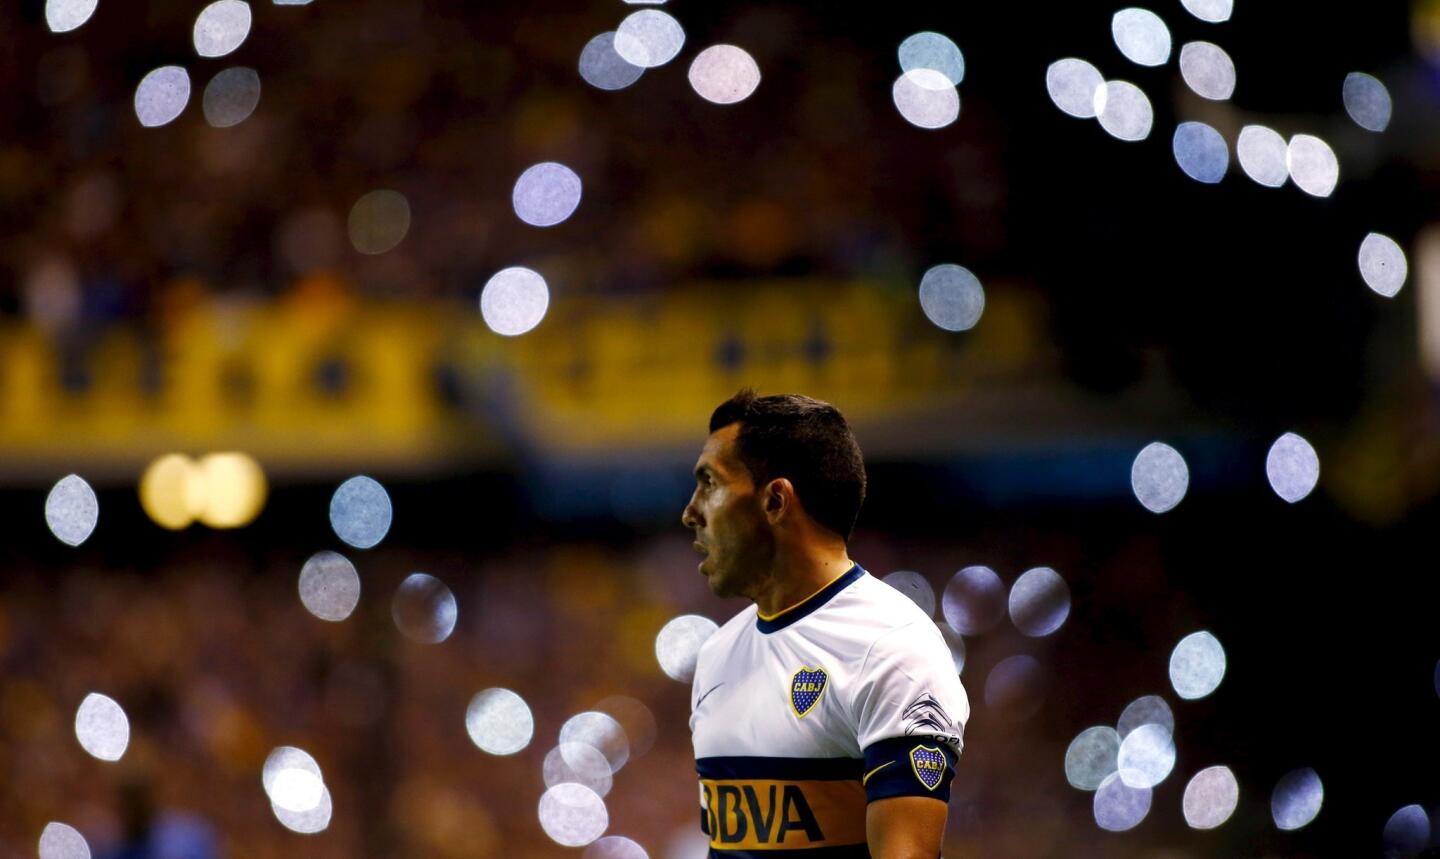 Boca Juniors' striker Carlos Tevez walks on the field as cell phone flash lights light up the background during their Argentine First Division soccer match against Tigre in Buenos Aires, Argentina